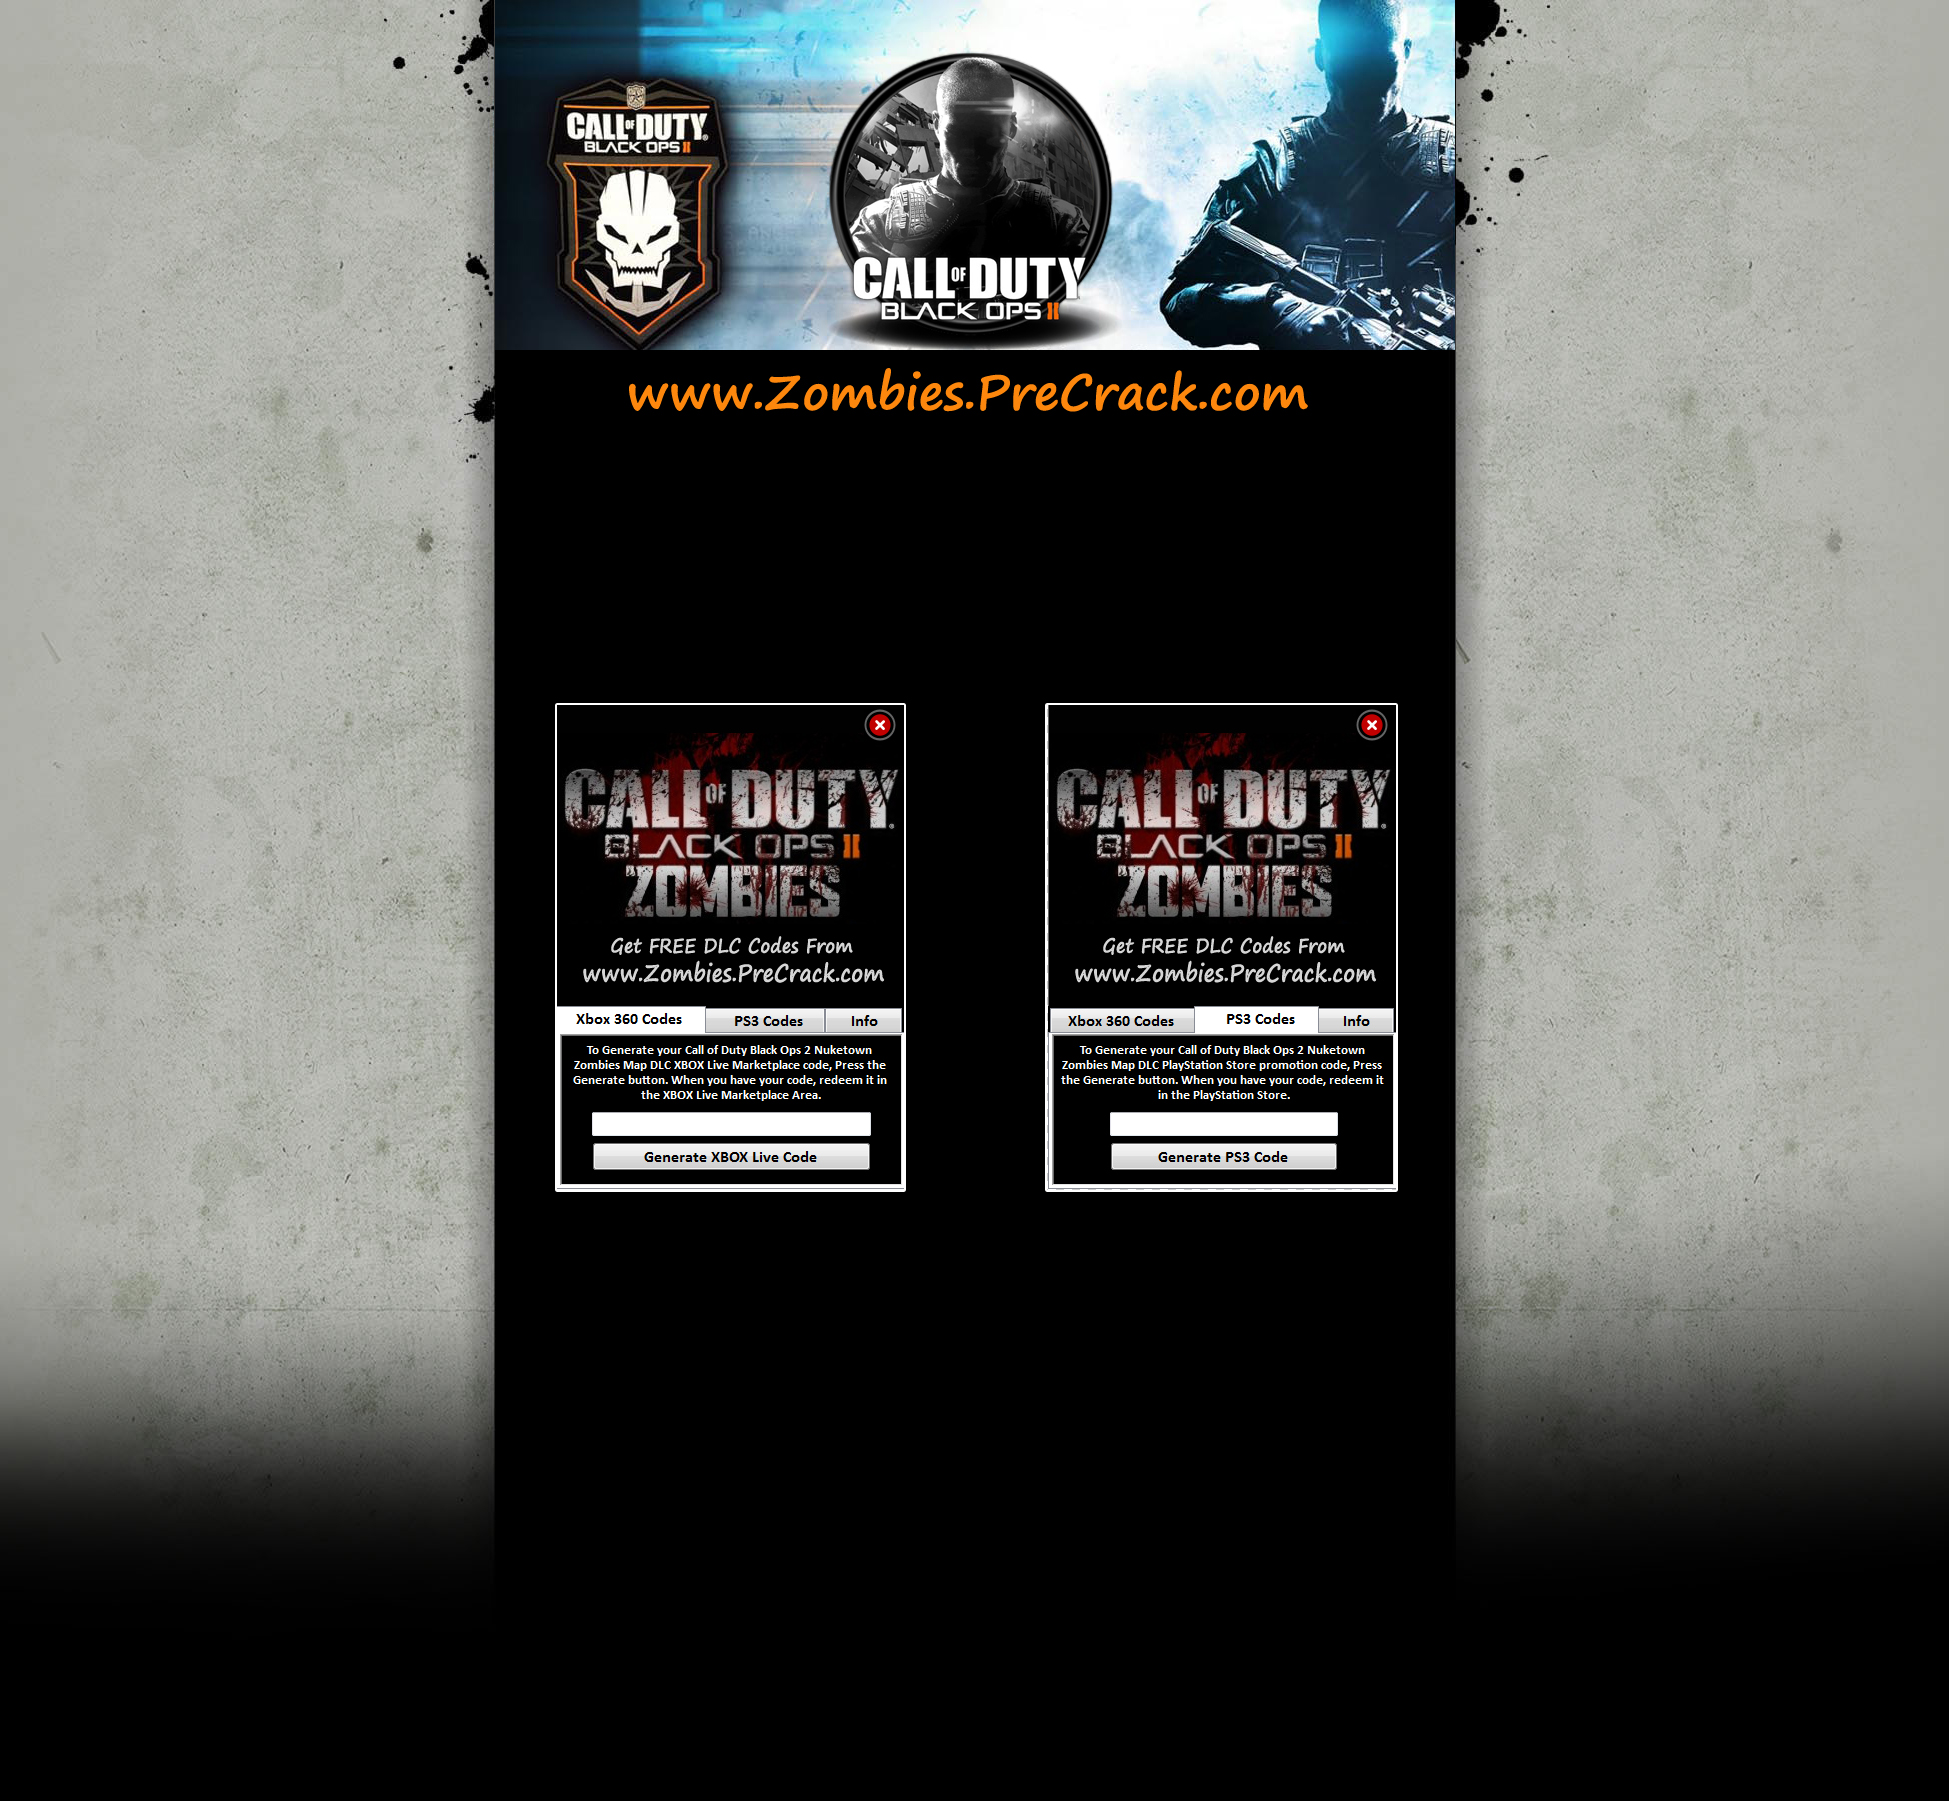 free black ops 2 nuketown zombies code xbox 360